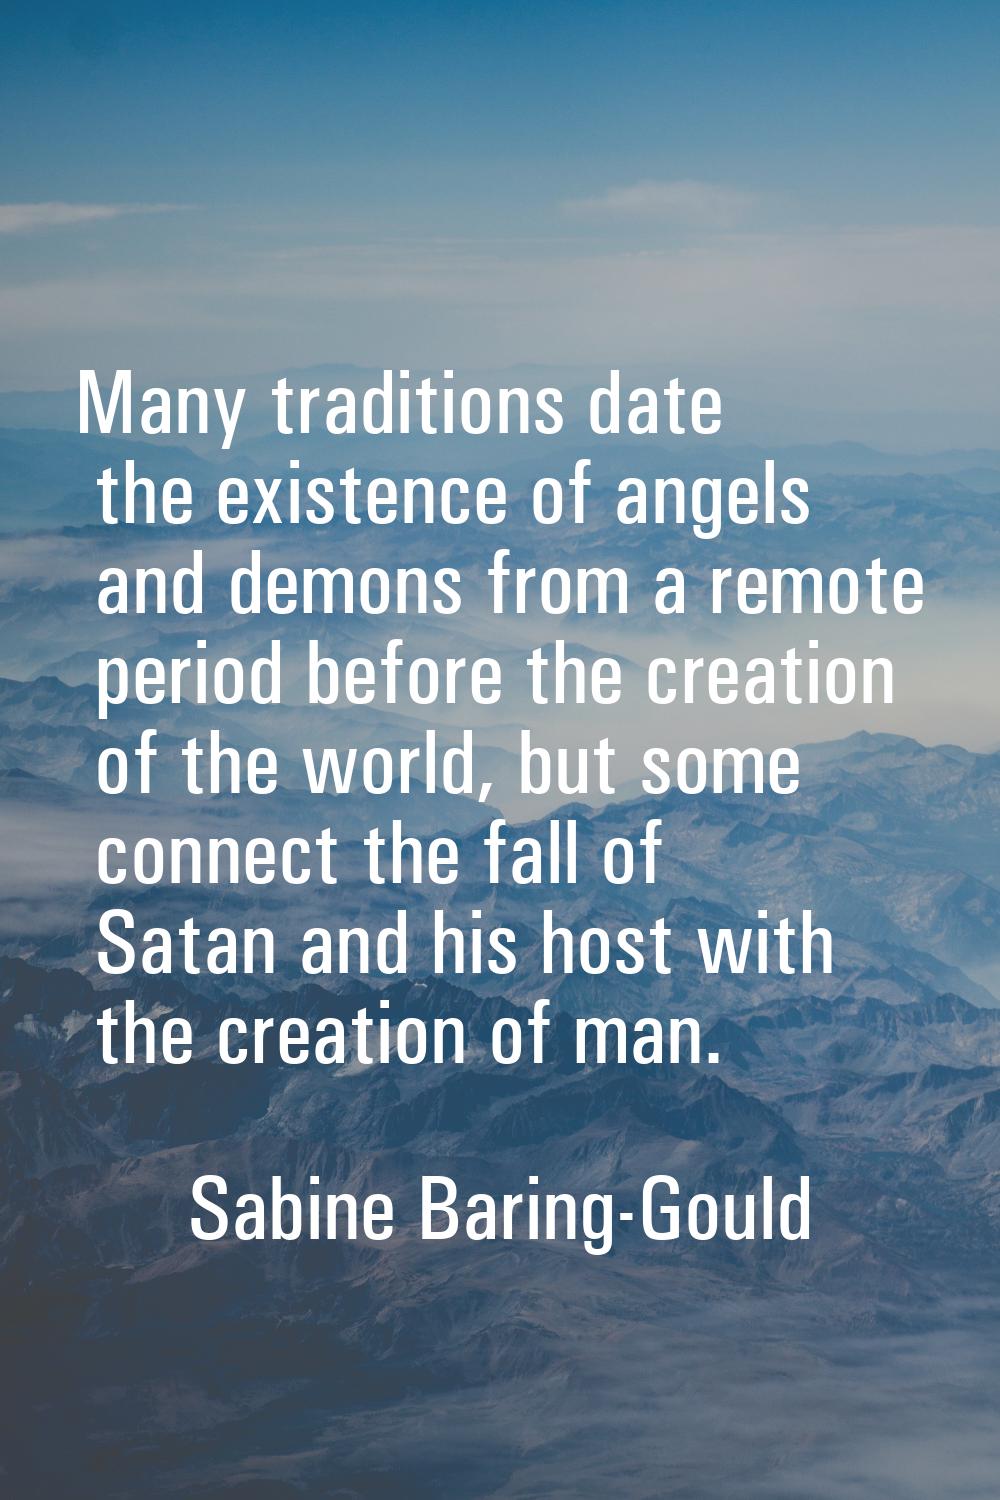 Many traditions date the existence of angels and demons from a remote period before the creation of